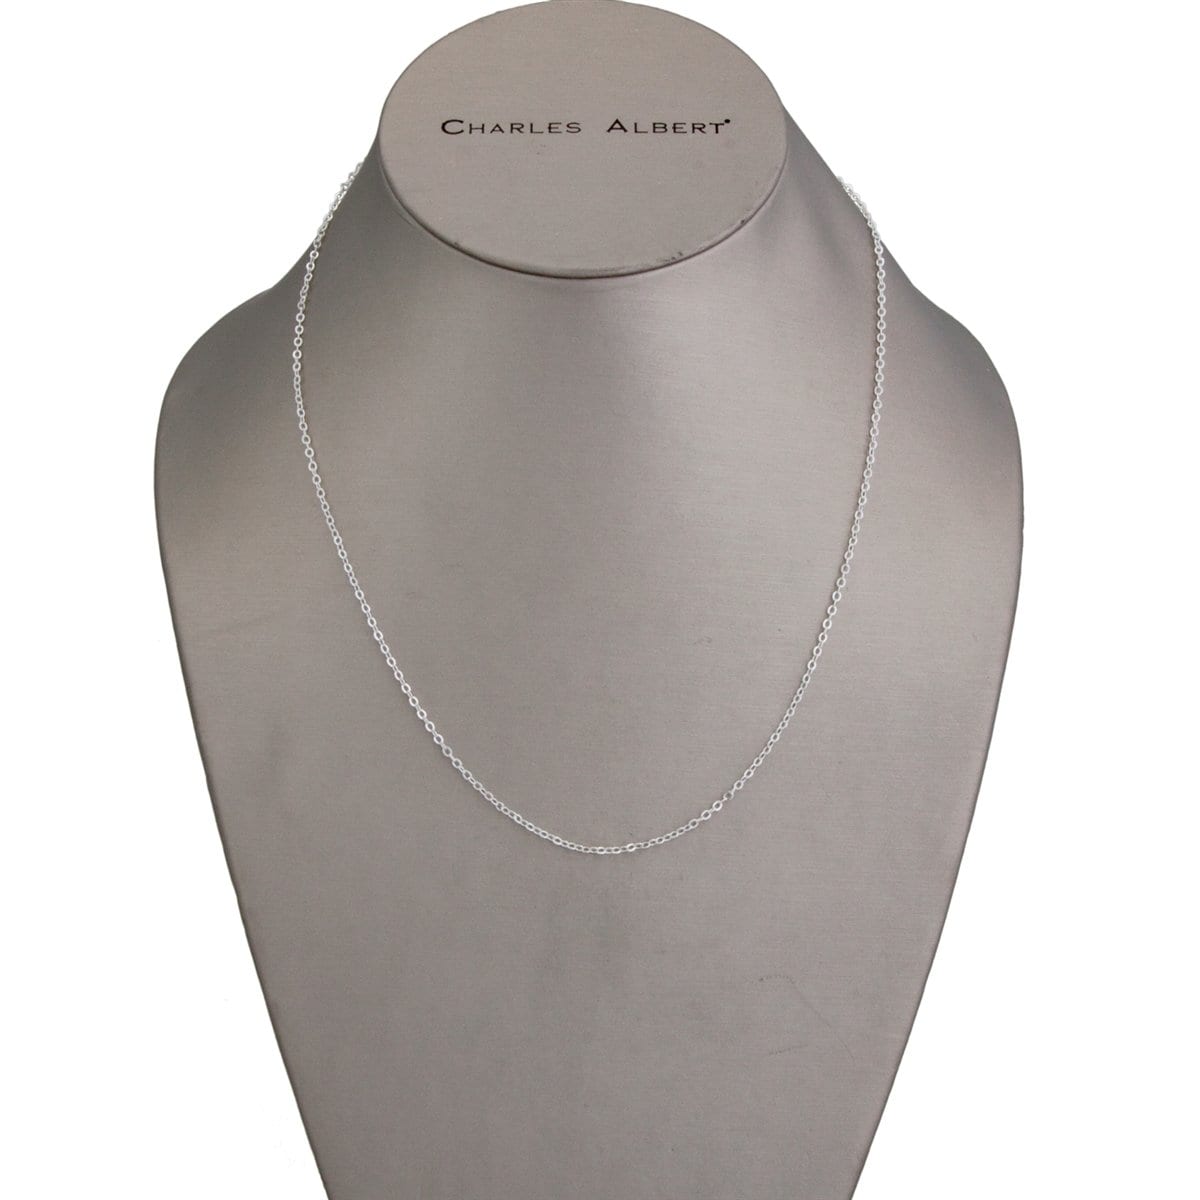 Thin Silver Tone Base Metal Chain - 17" + 3" Extender | Charles Albert Jewelry